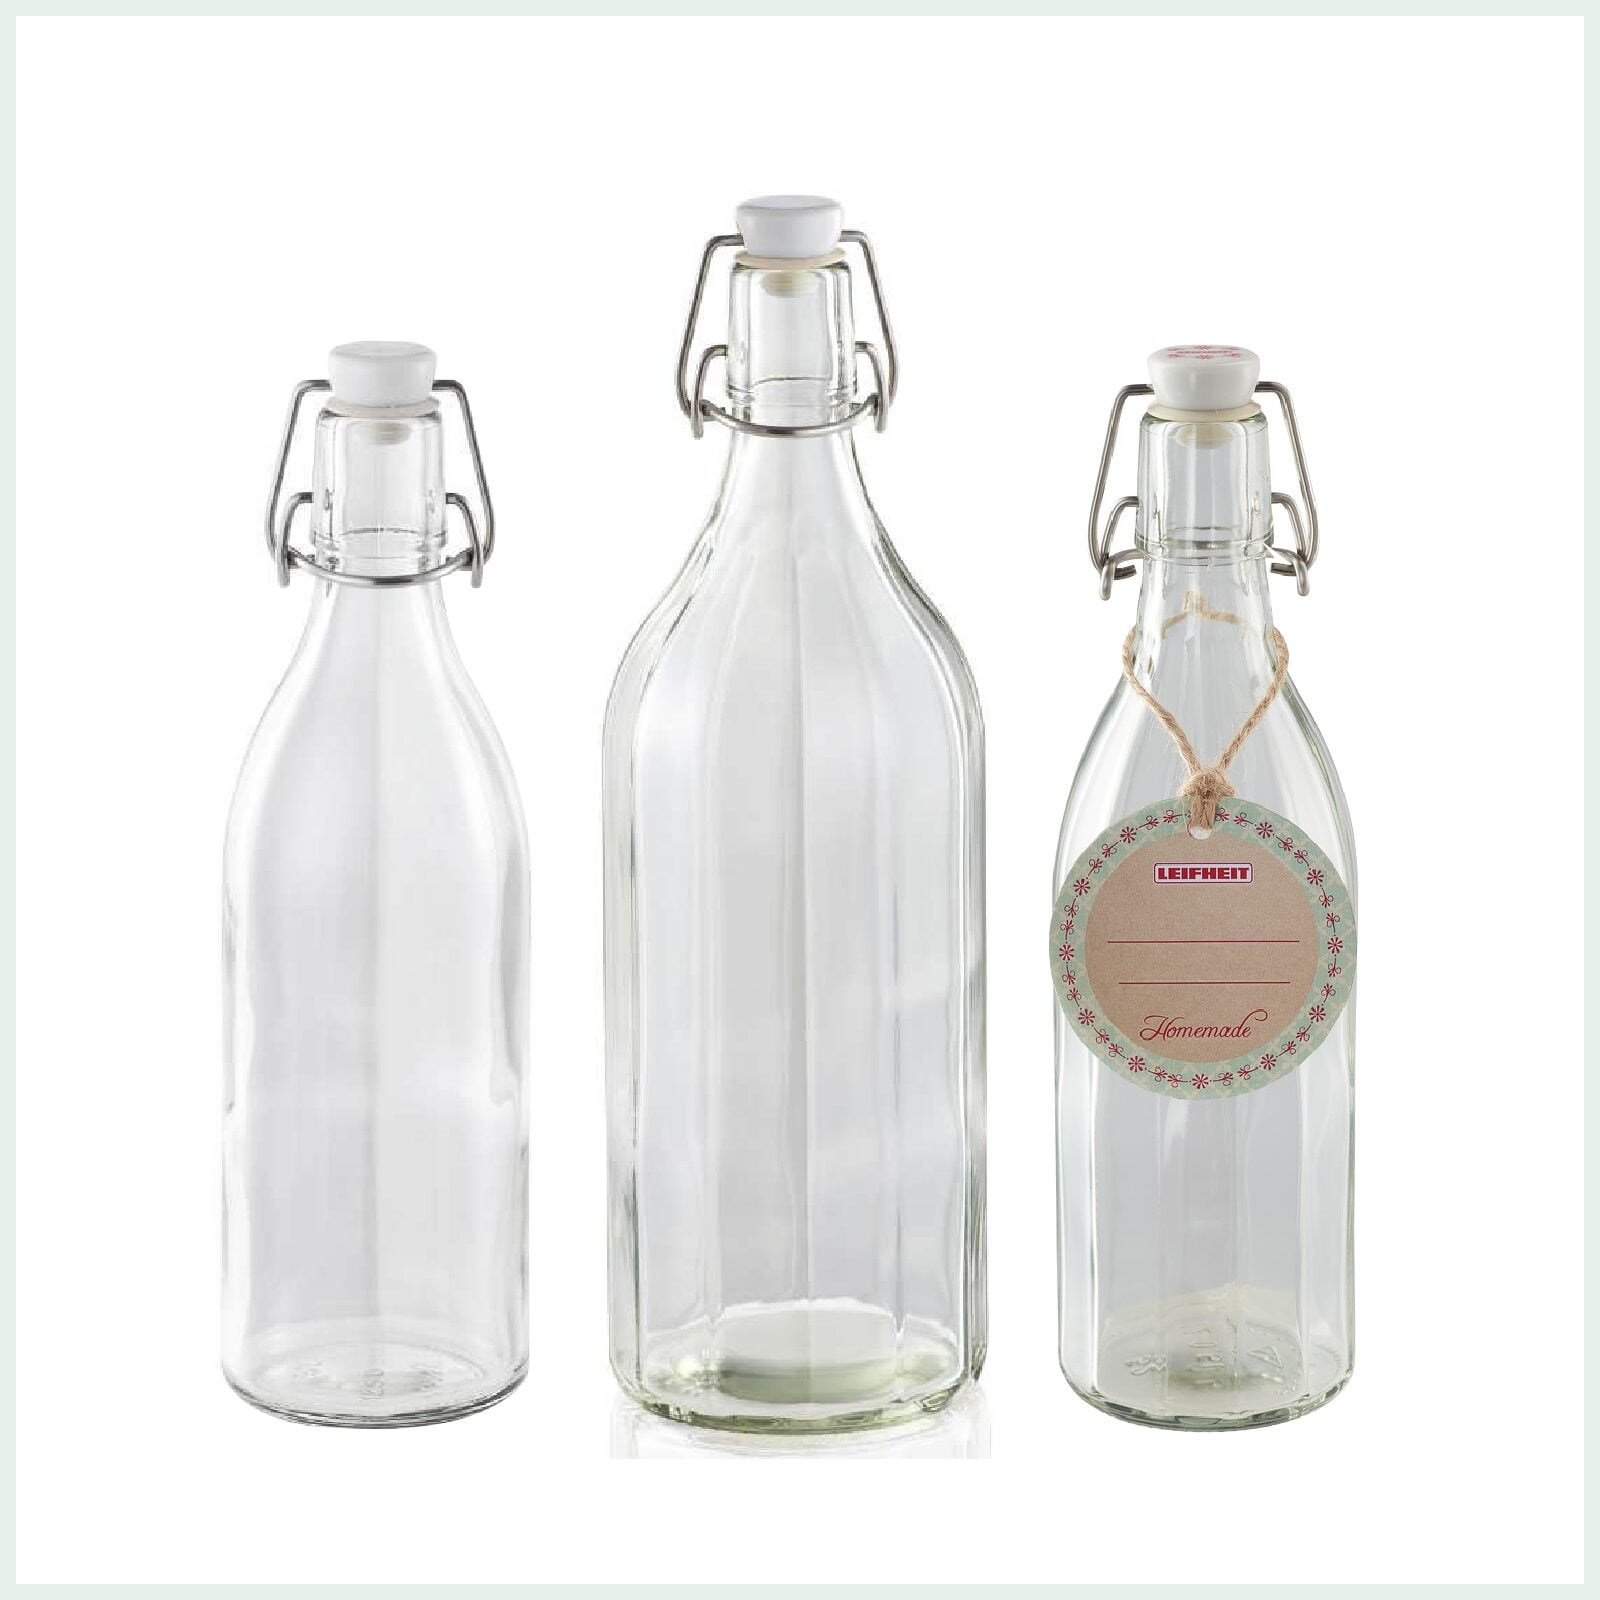 Leifheit preserve bottles with swing top closure and faceted or round designs. Ideal for cordials, kombucha and juices.